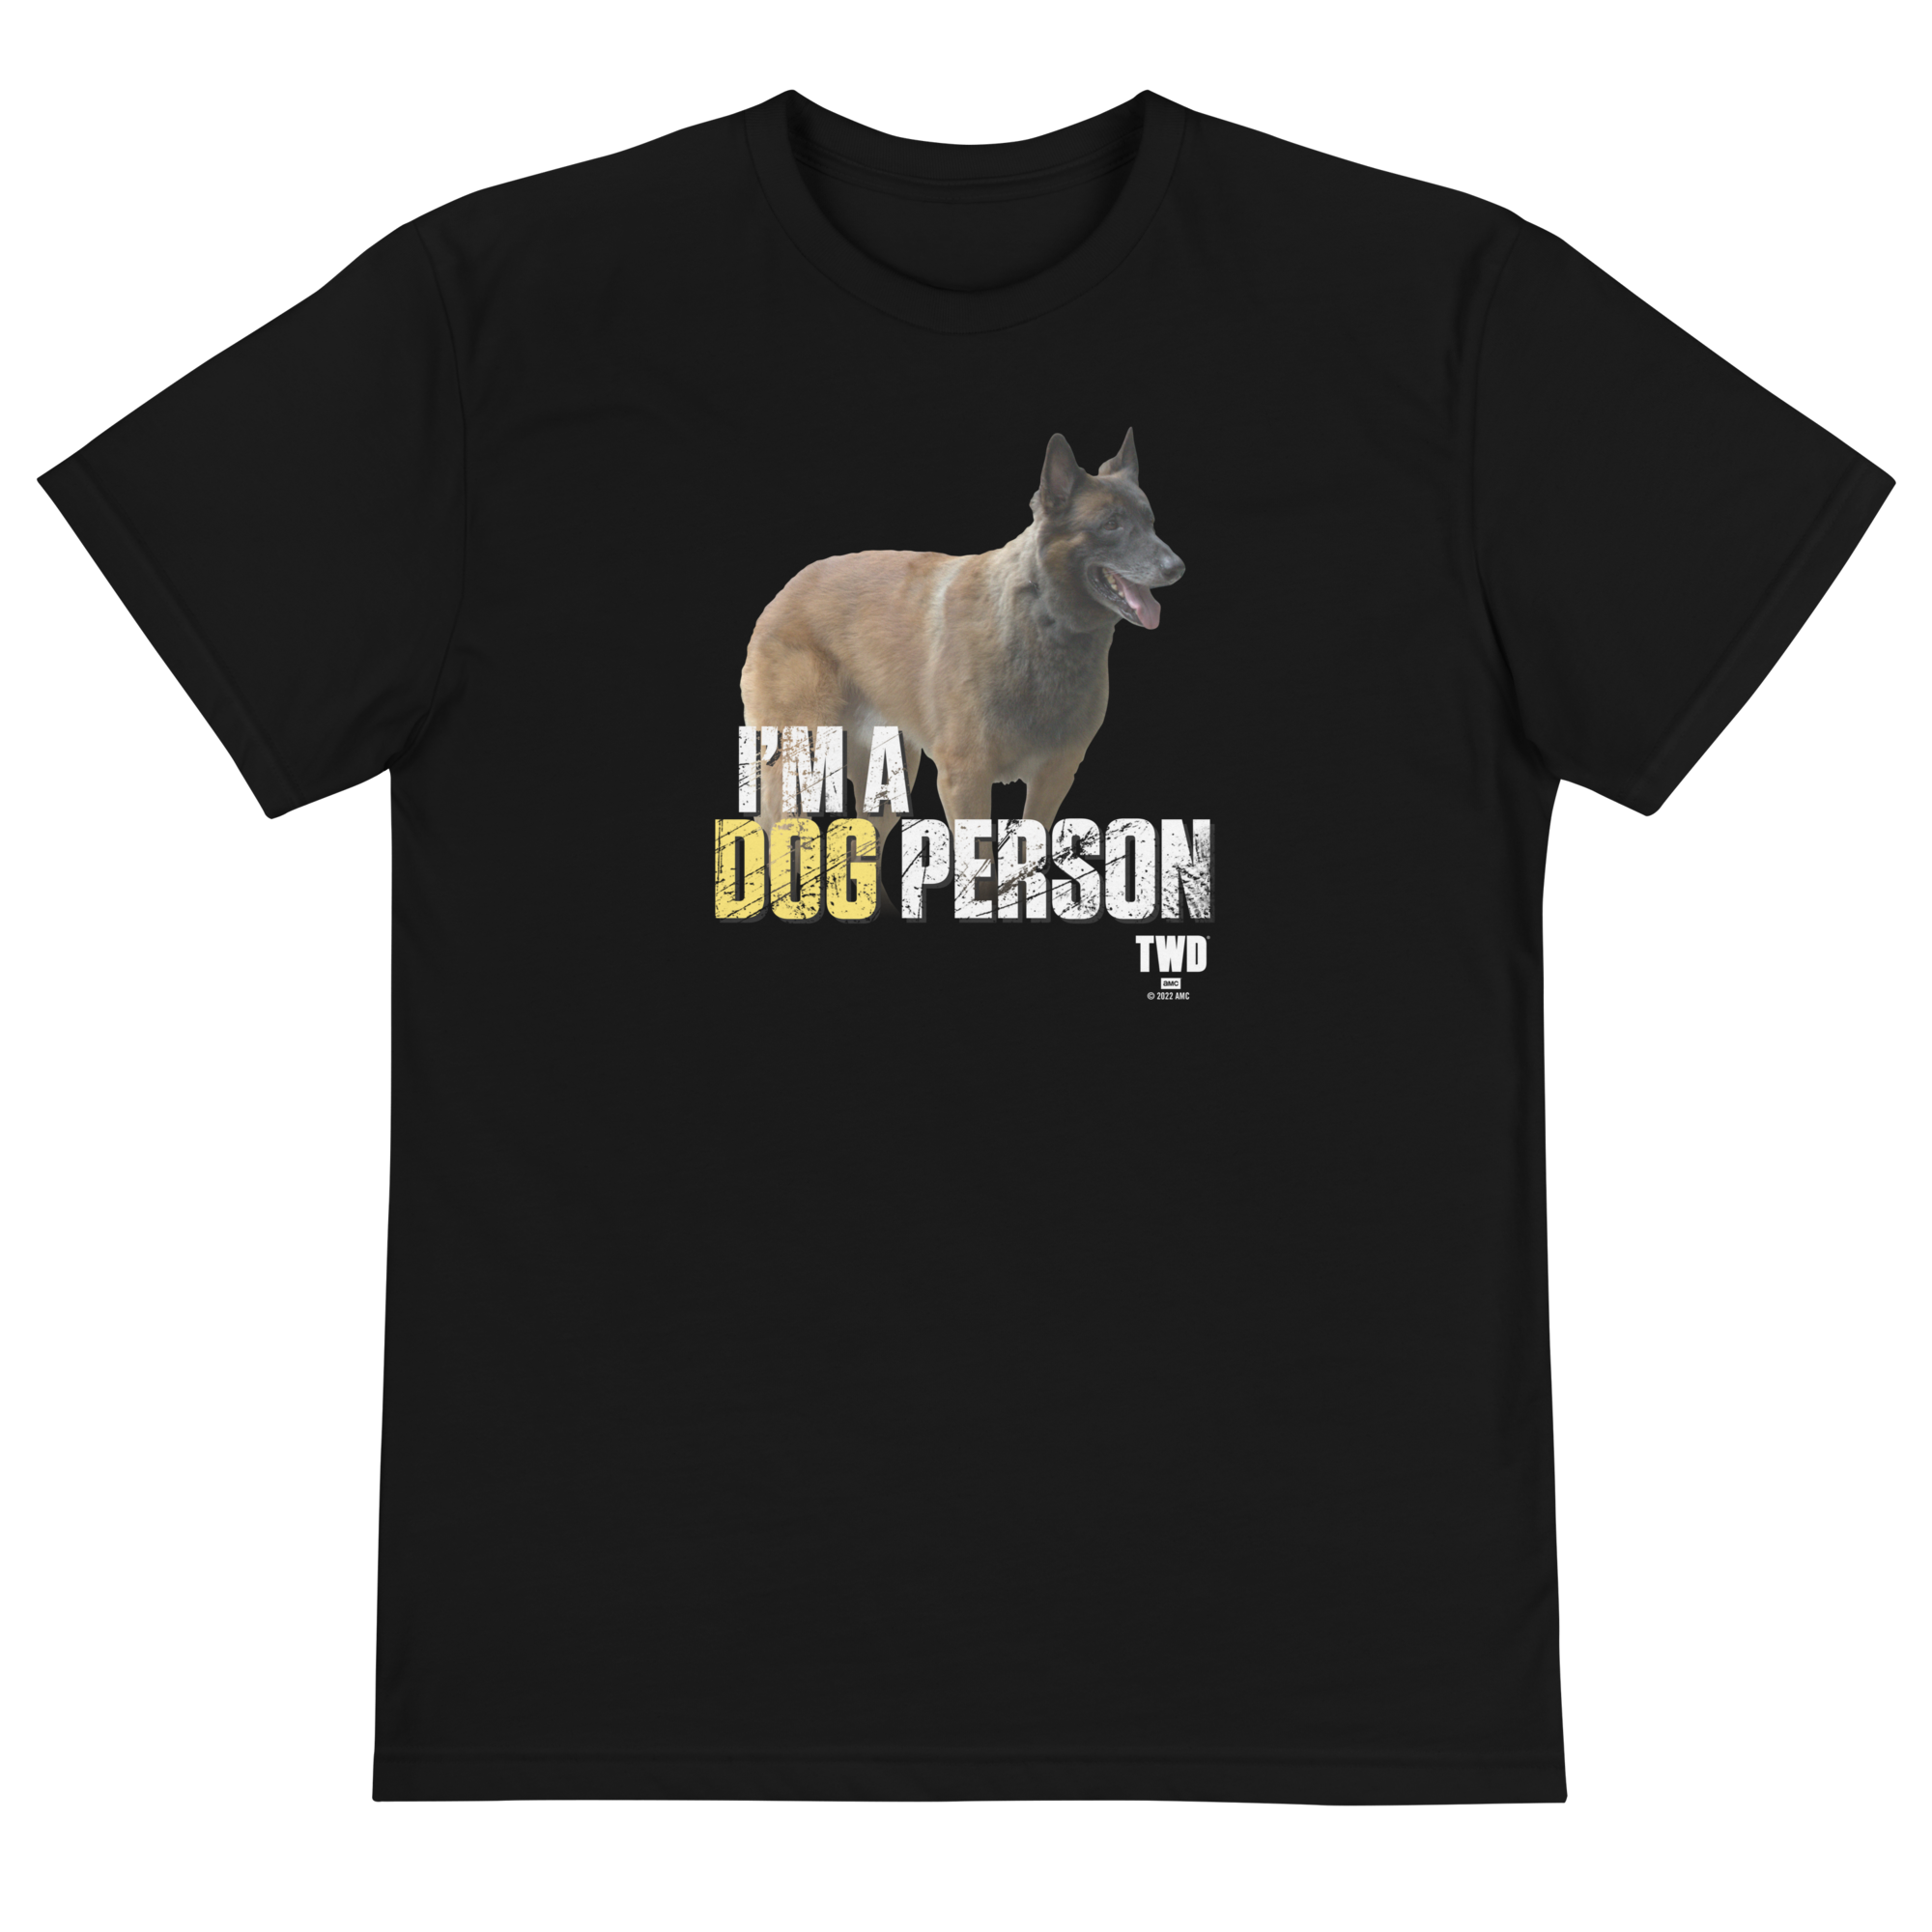 The Walking Dead Dog Person Adult Eco Short Sleeve T-Shirt-0